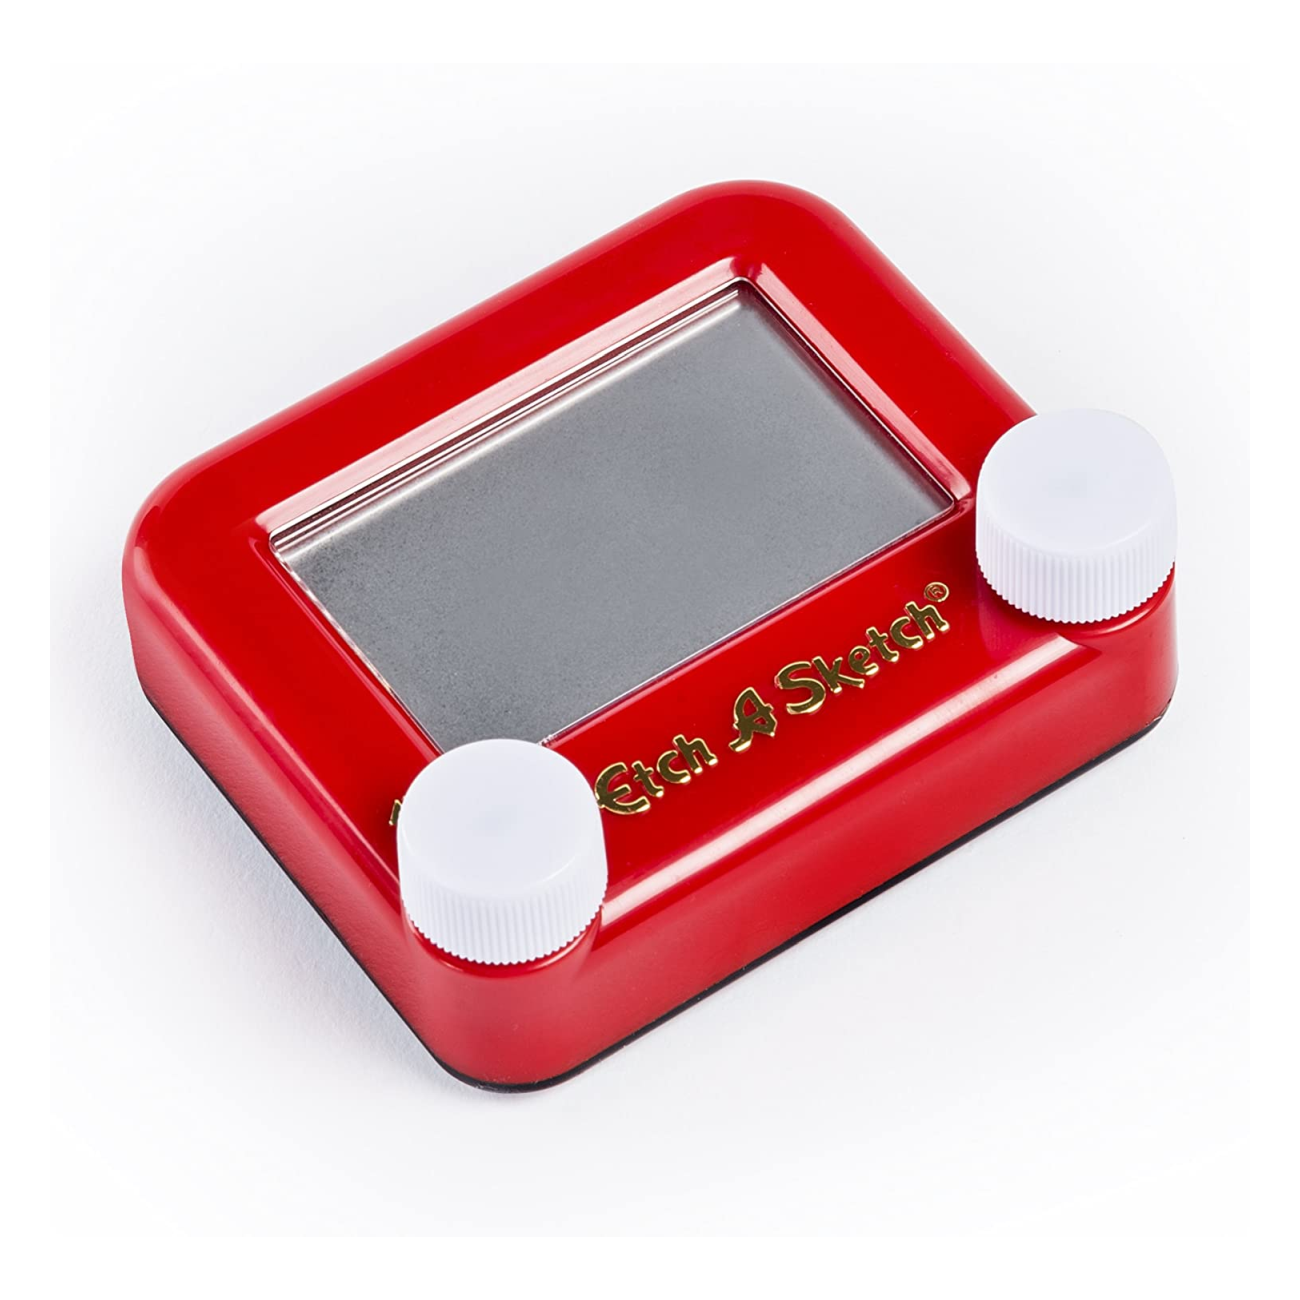 Etch-A-Sketch Art – Simply Awesome — Just a Little Further